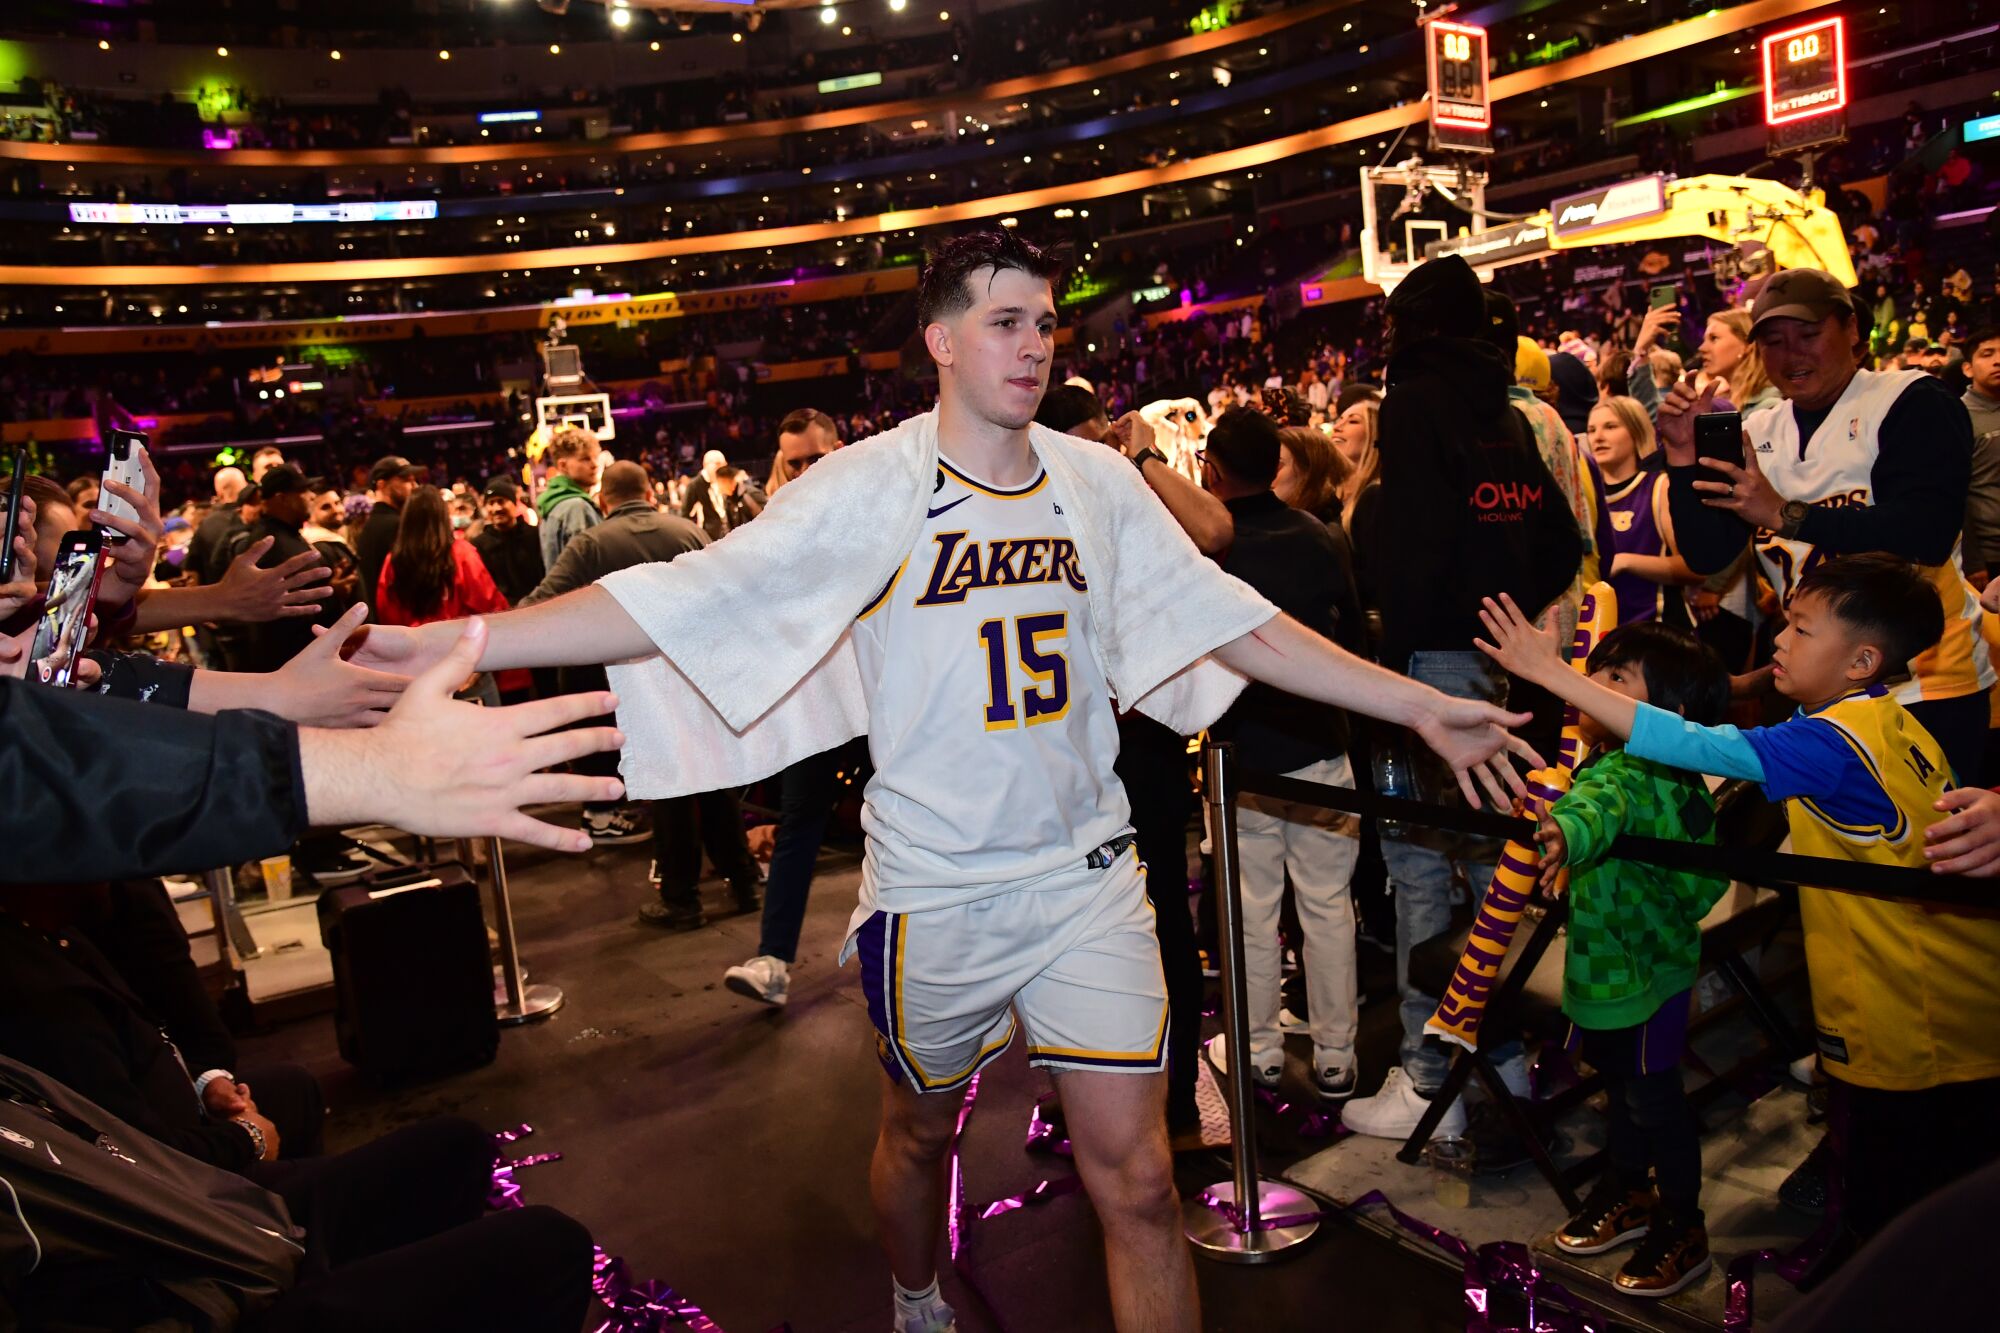 Lakers guard Austin Reaves touches hands with fans as he walks off the court with a towel draped on his shoulders.